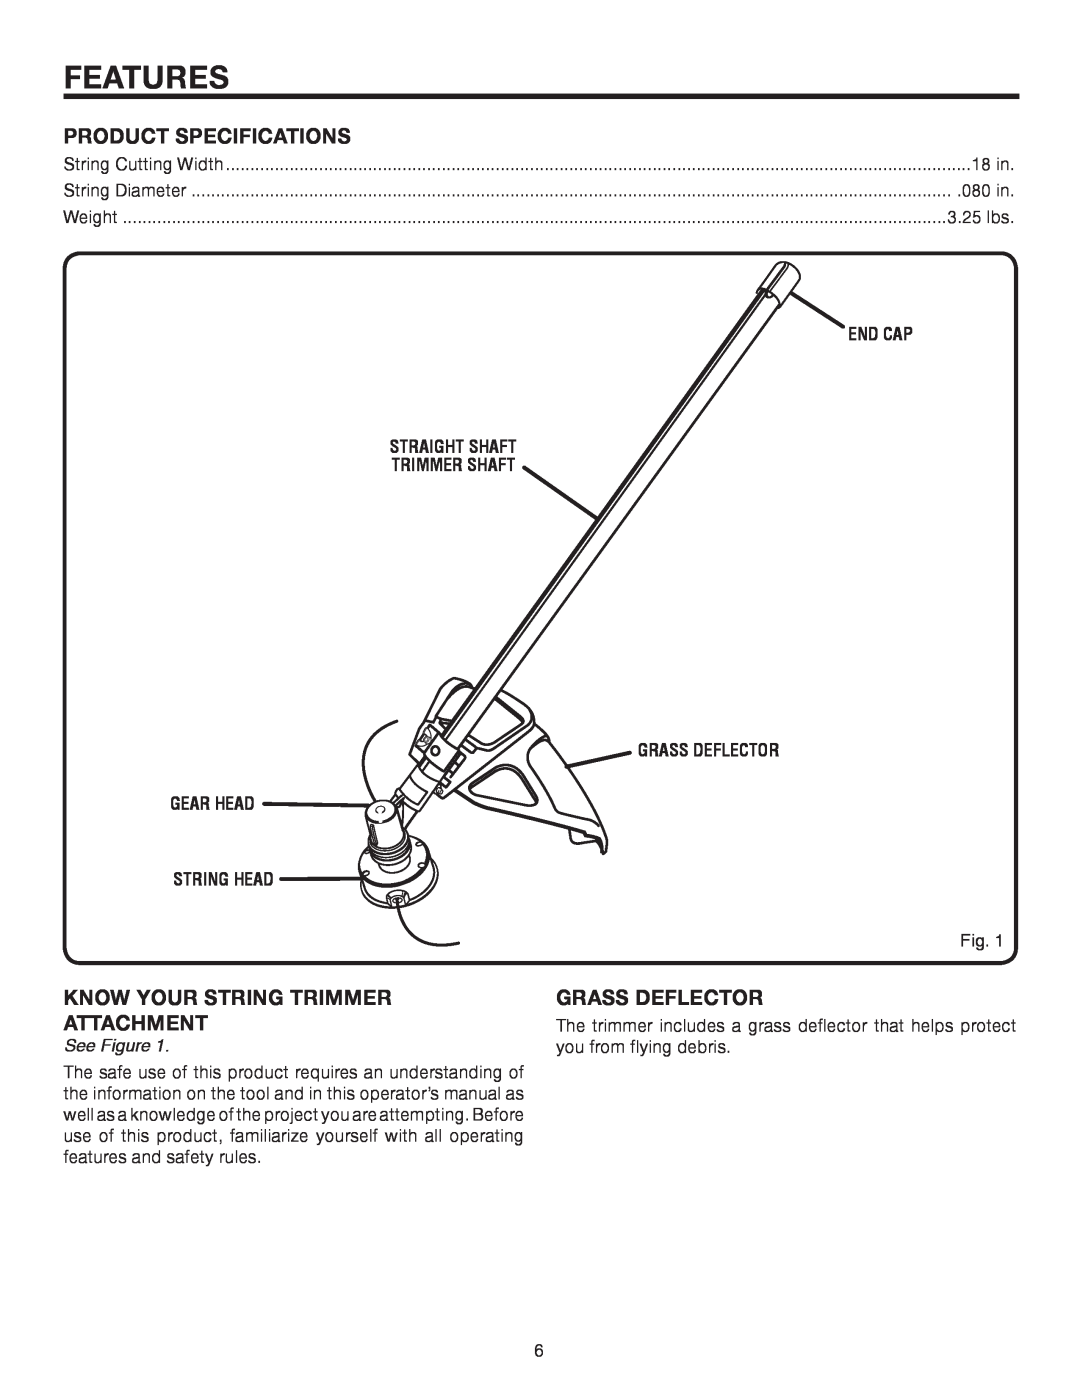 Homelite UT15522F manual Features, Product Specifications, Know Your String Trimmer, Grass Deflector, Attachment, Gear Head 